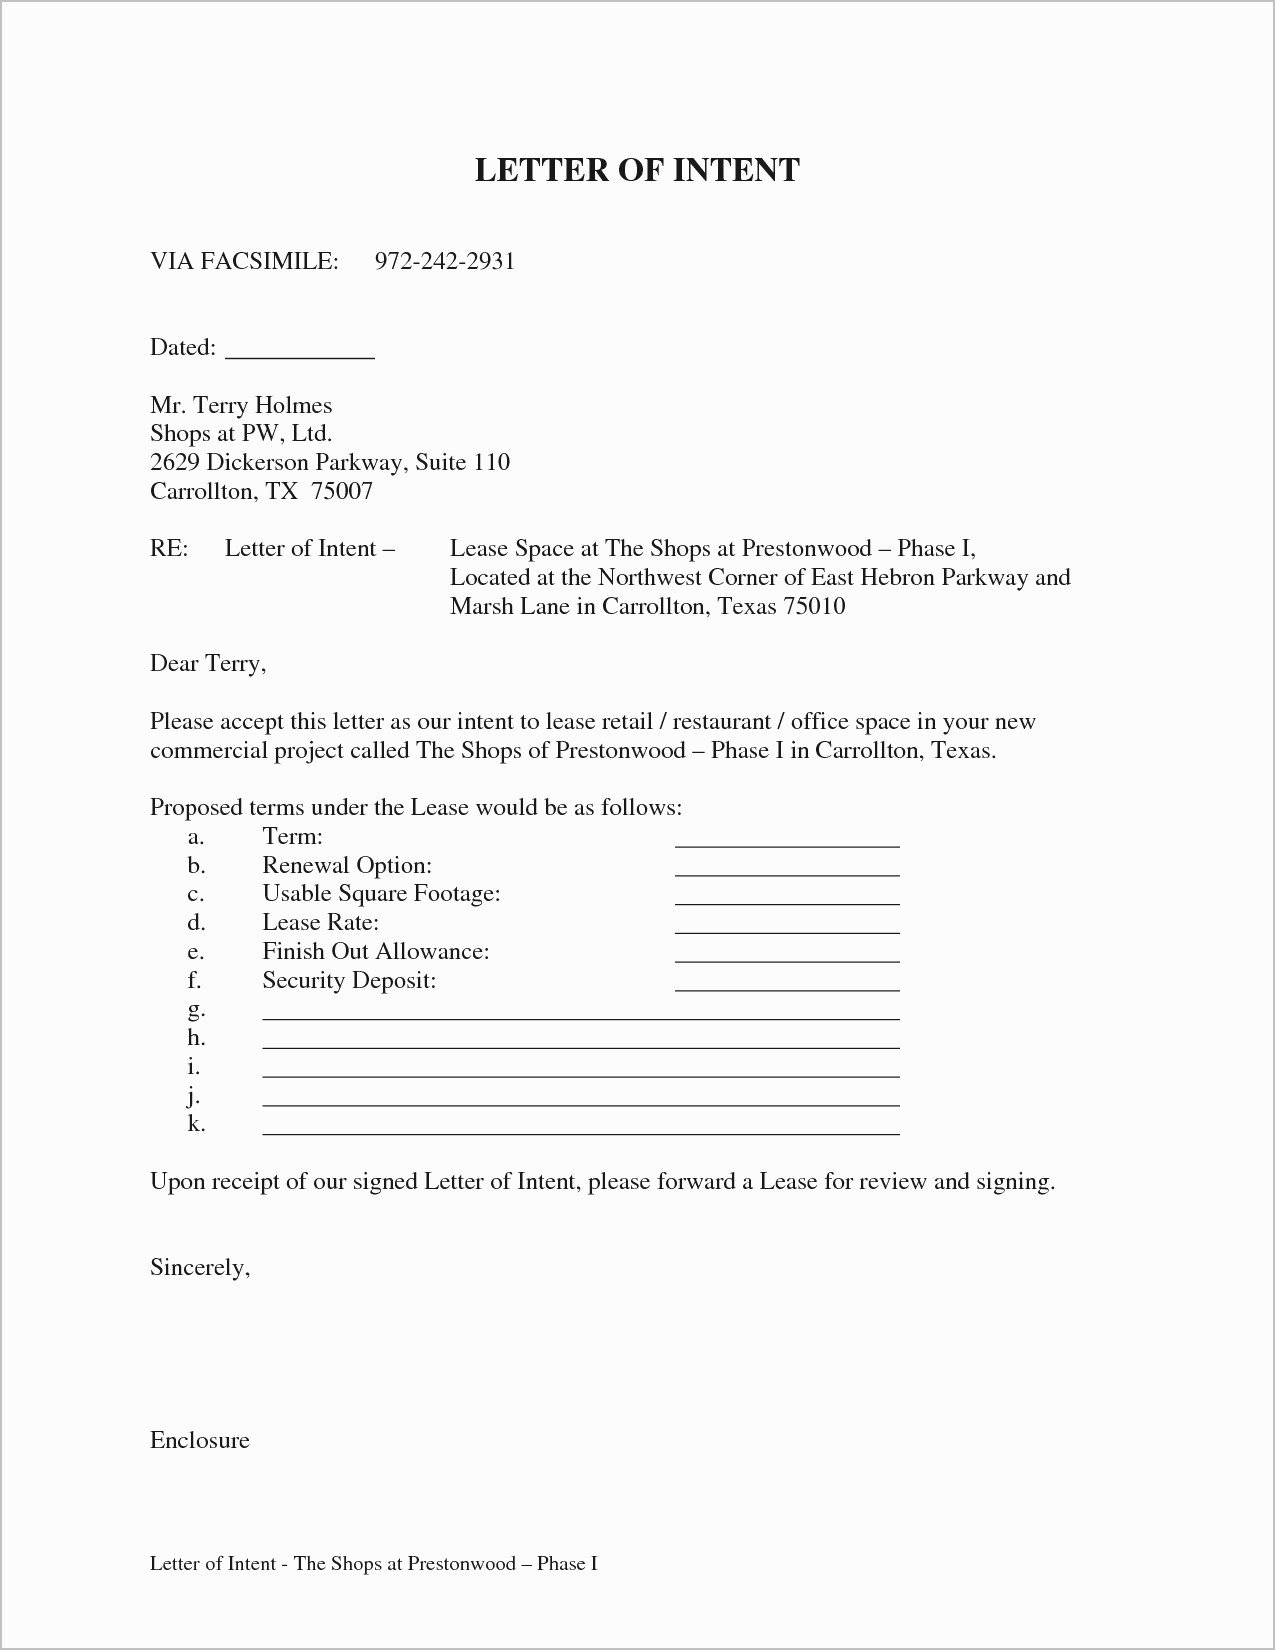 Letter Of Intent to Lease Template Elegant Letter Intent to Lease Mercial Space Template Collection